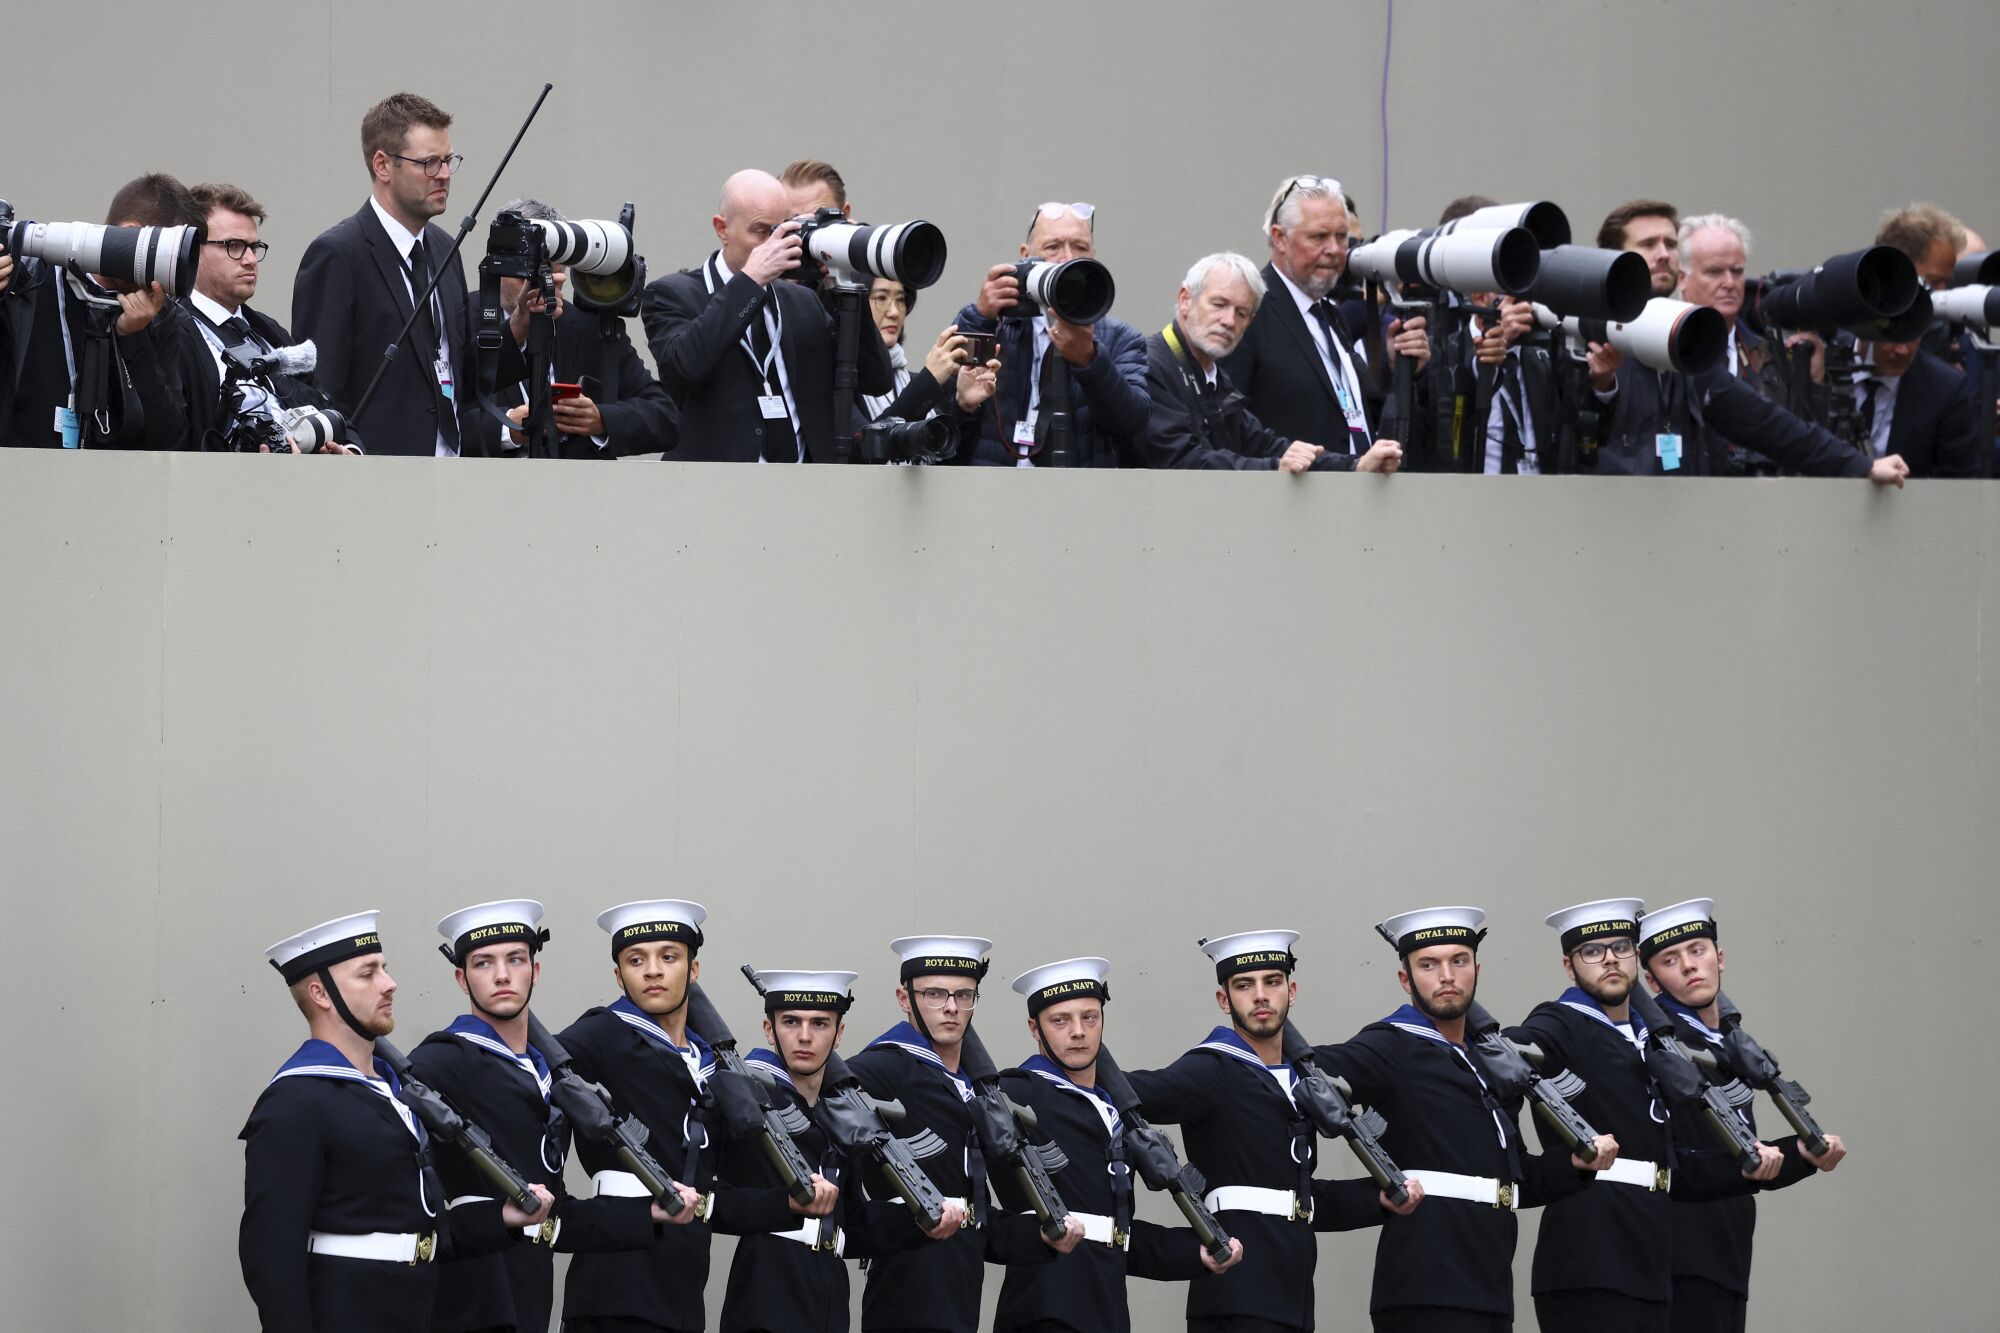 Members of the Royal Navy stand under the line of photographers. 